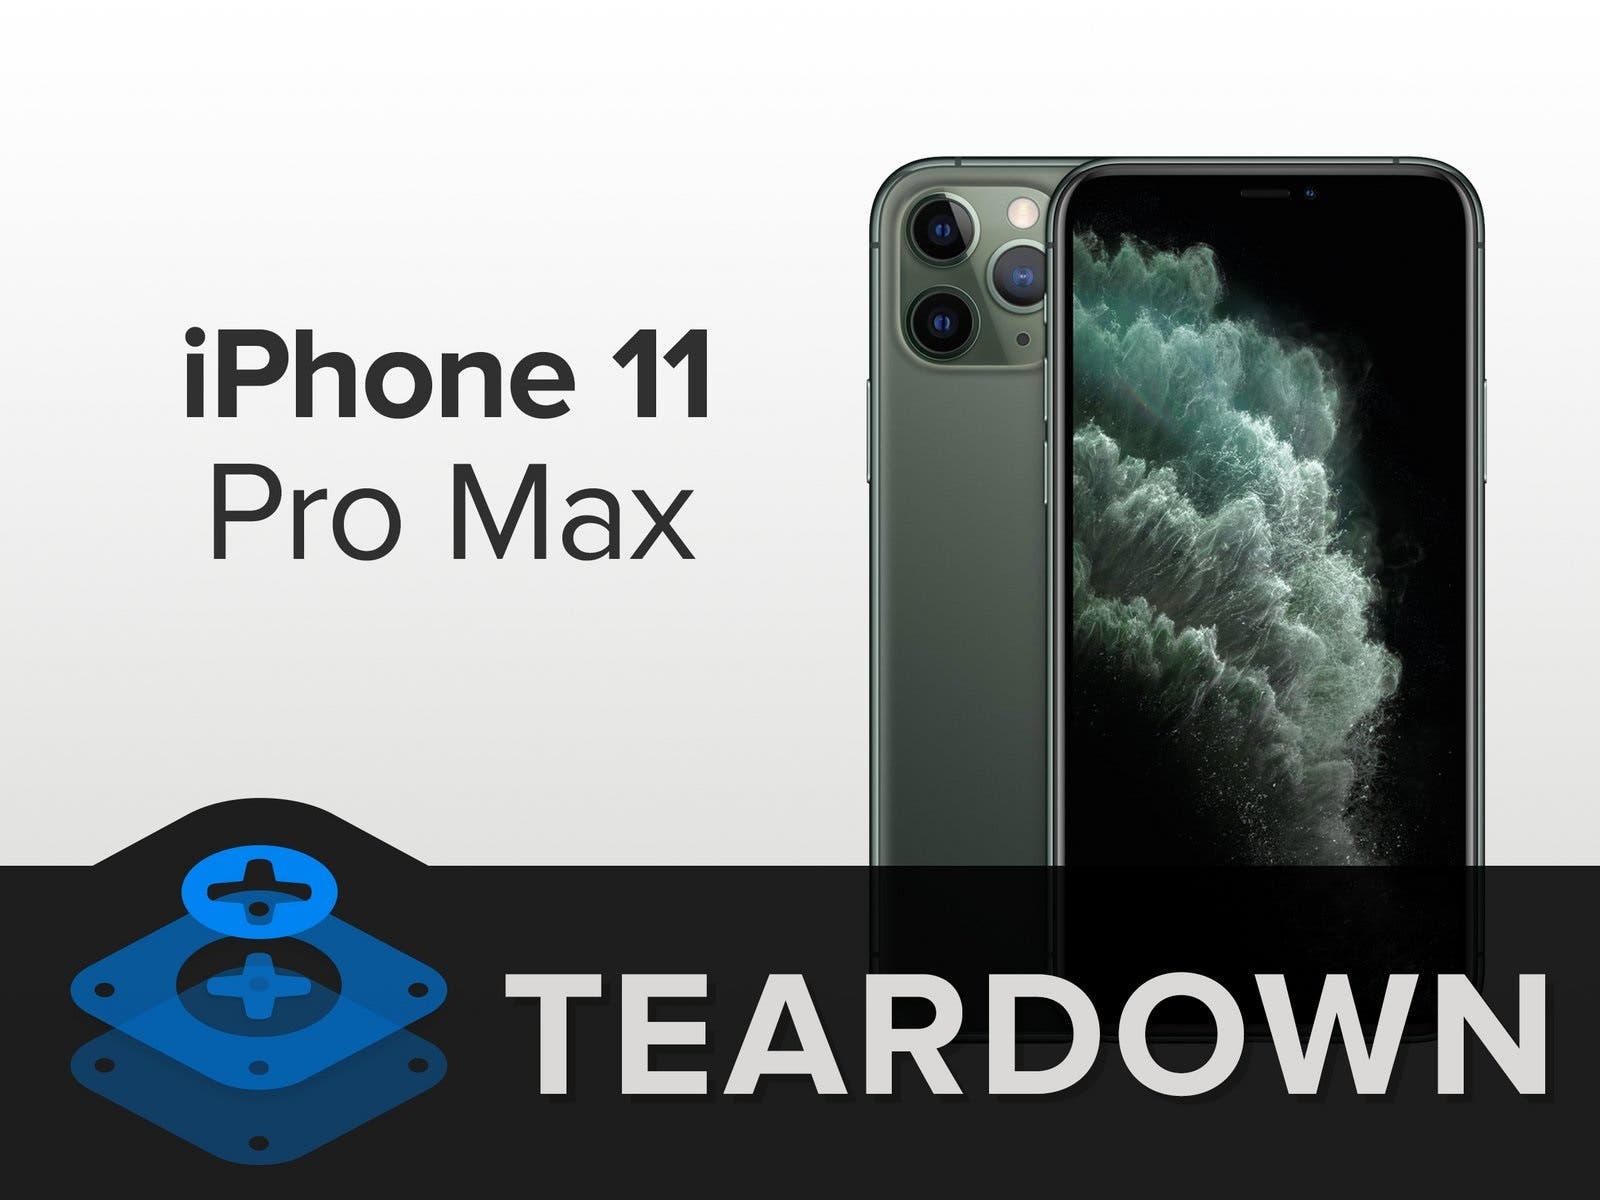 iPhone 11 Pro Max Teardown: Here is all the hidden features